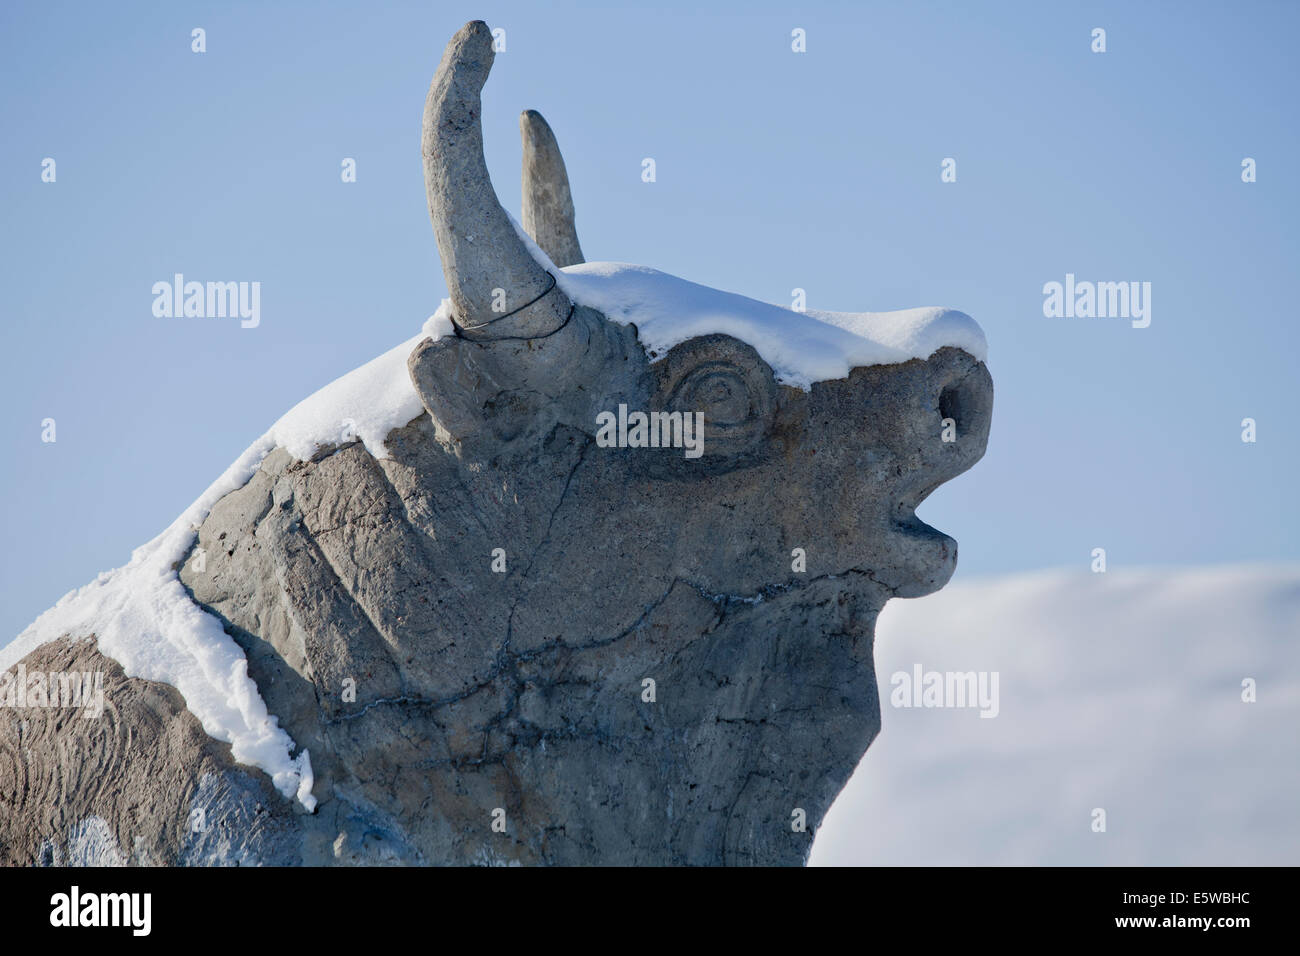 Stone statue of bull with horns covered in snow Stock Photo